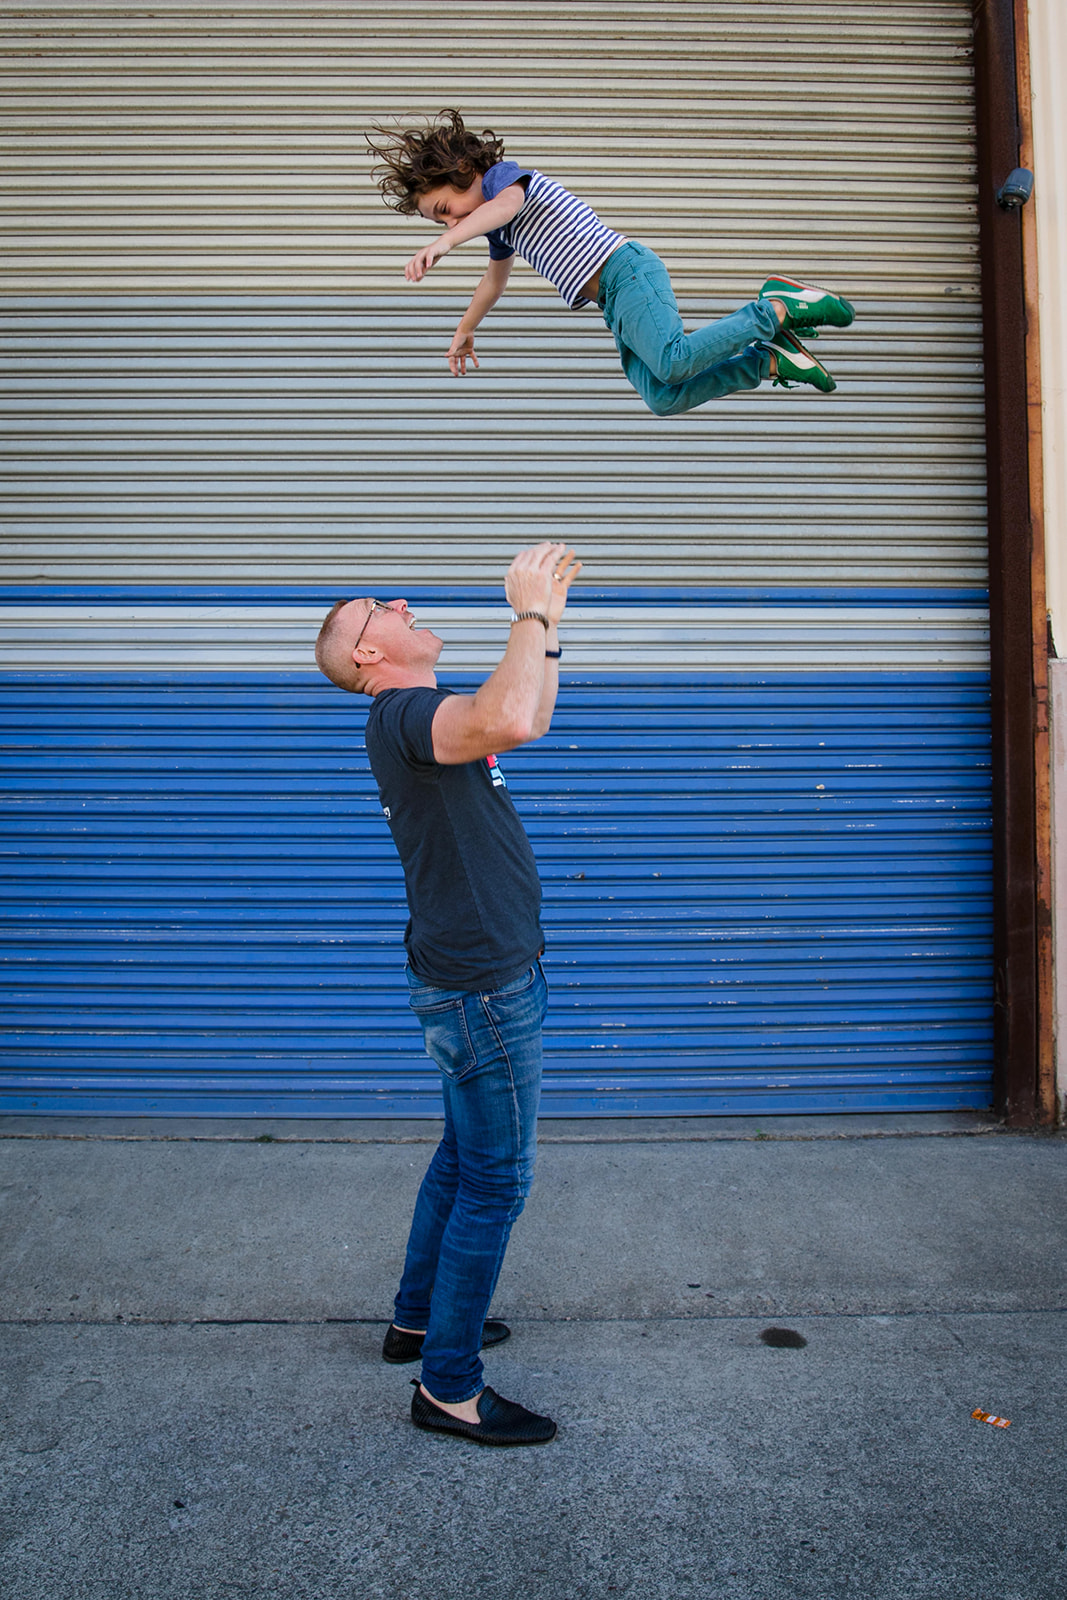 photo of dad throwing kid in the air